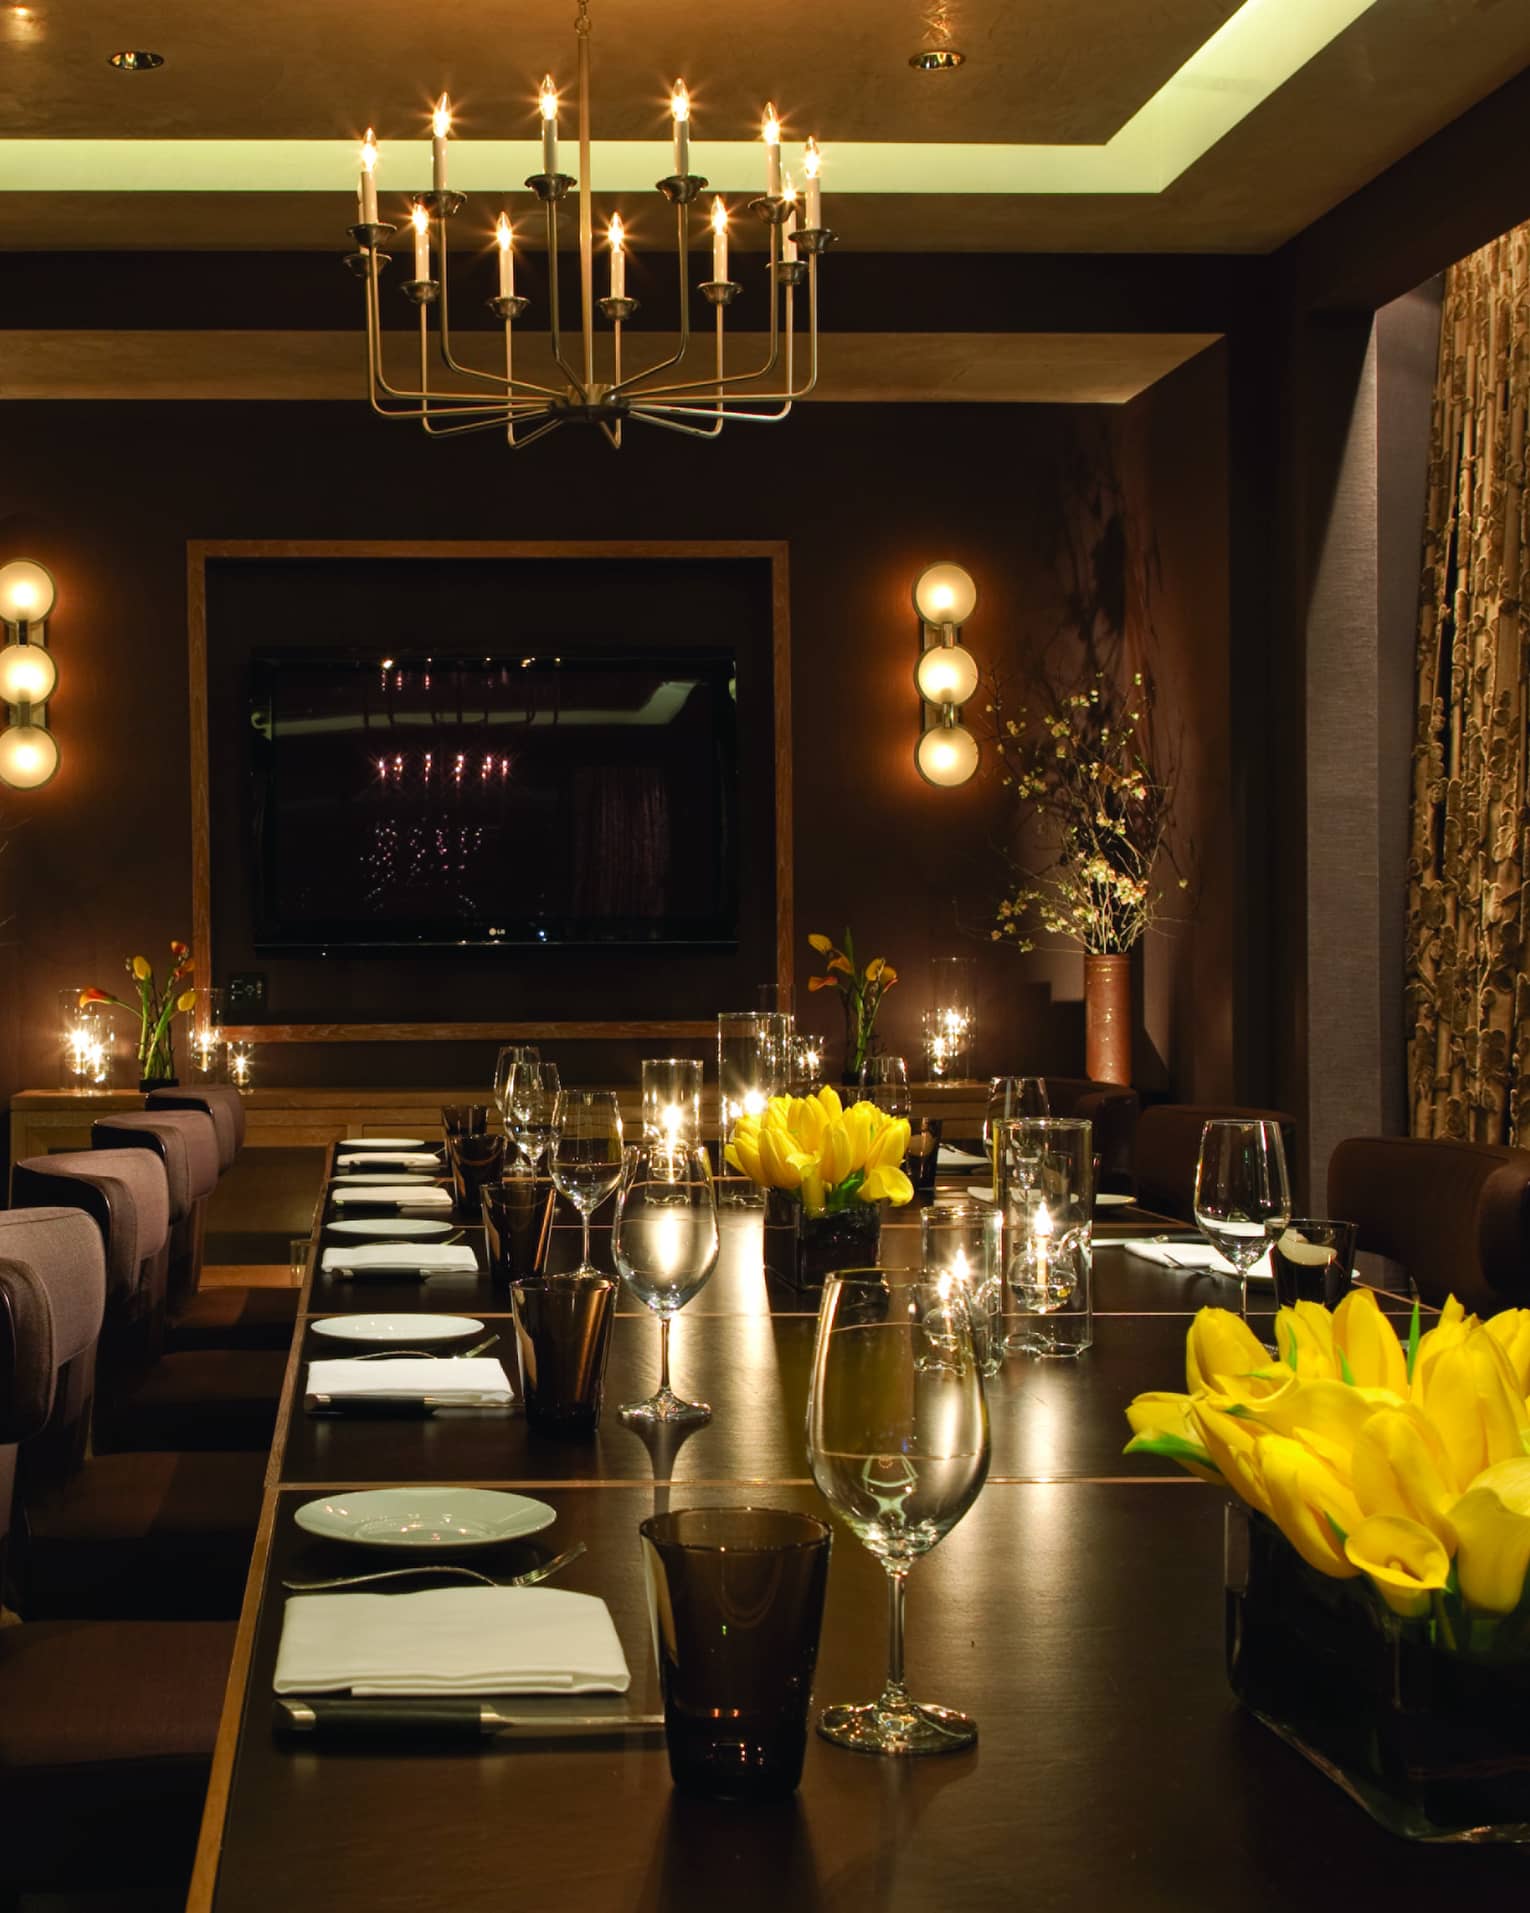 Long private dining table with plush chairs set with wine glasses, yellow flowers, candles, low lights on walls